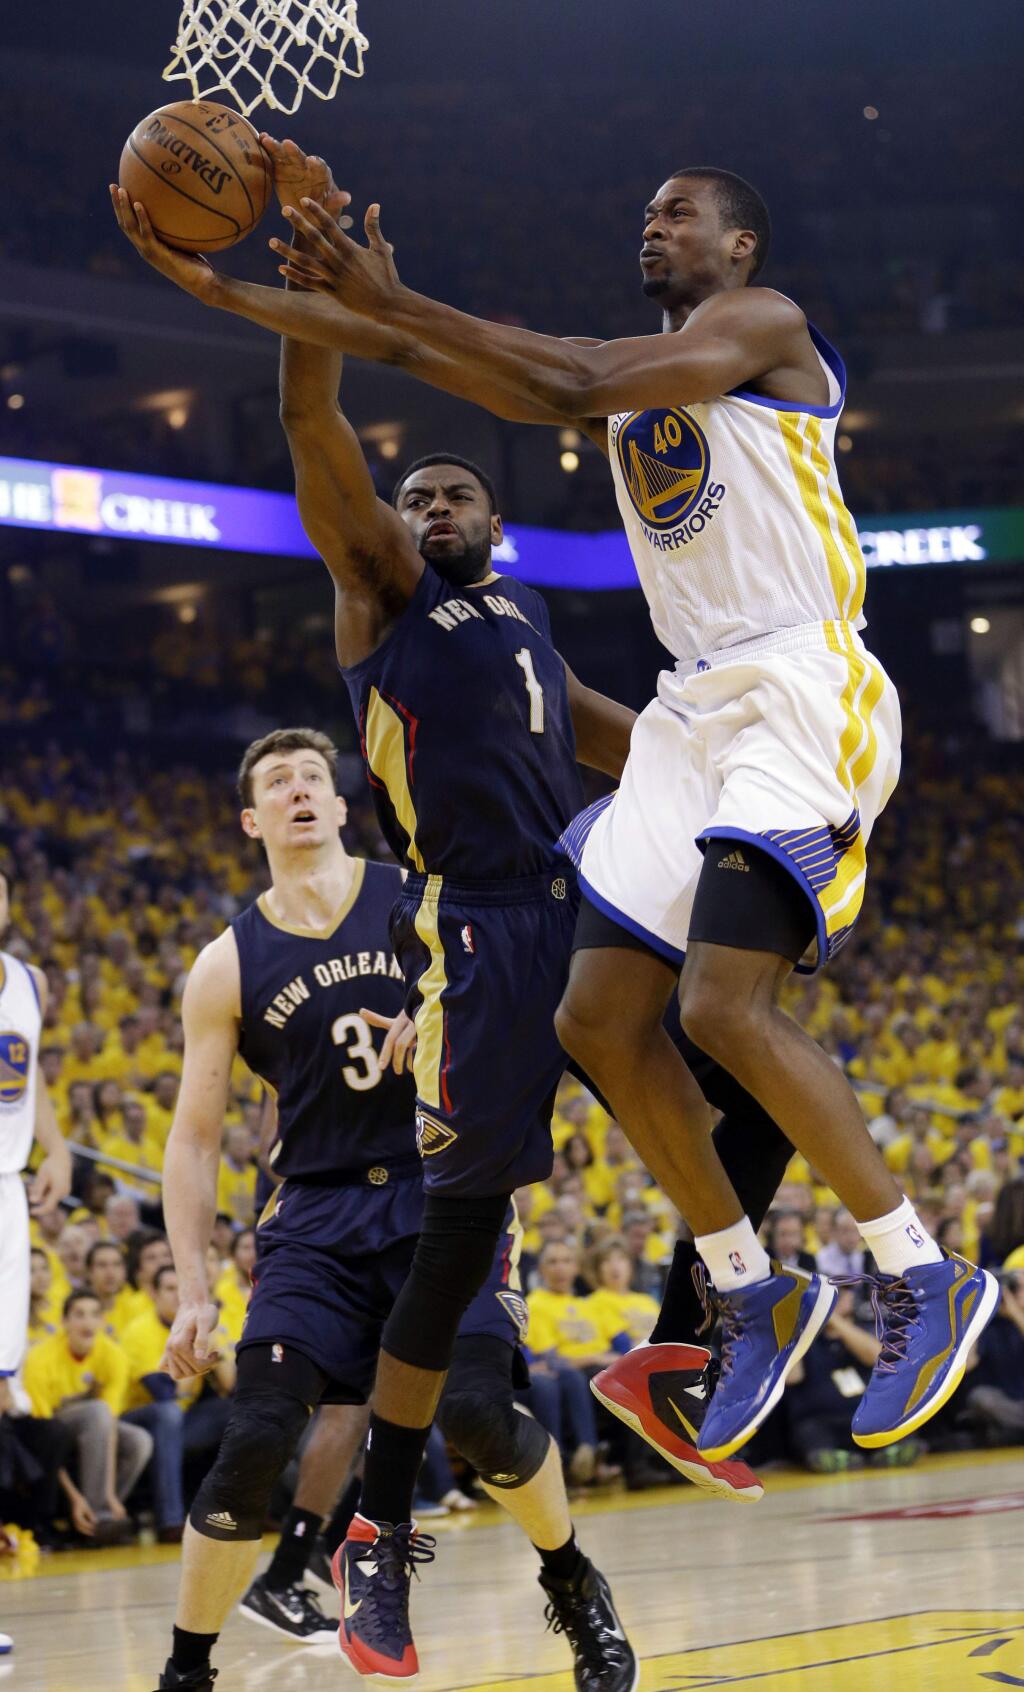 Golden State Warriors' Harrison Barnes (40) has his shot blocked by New Orleans Pelicans' Tyreke Evans (1) during the first half in Game 2 of a first-round NBA basketball playoff series Monday, April 20, 2015, in Oakland, Calif. (AP Photo/Marcio Jose Sanchez)